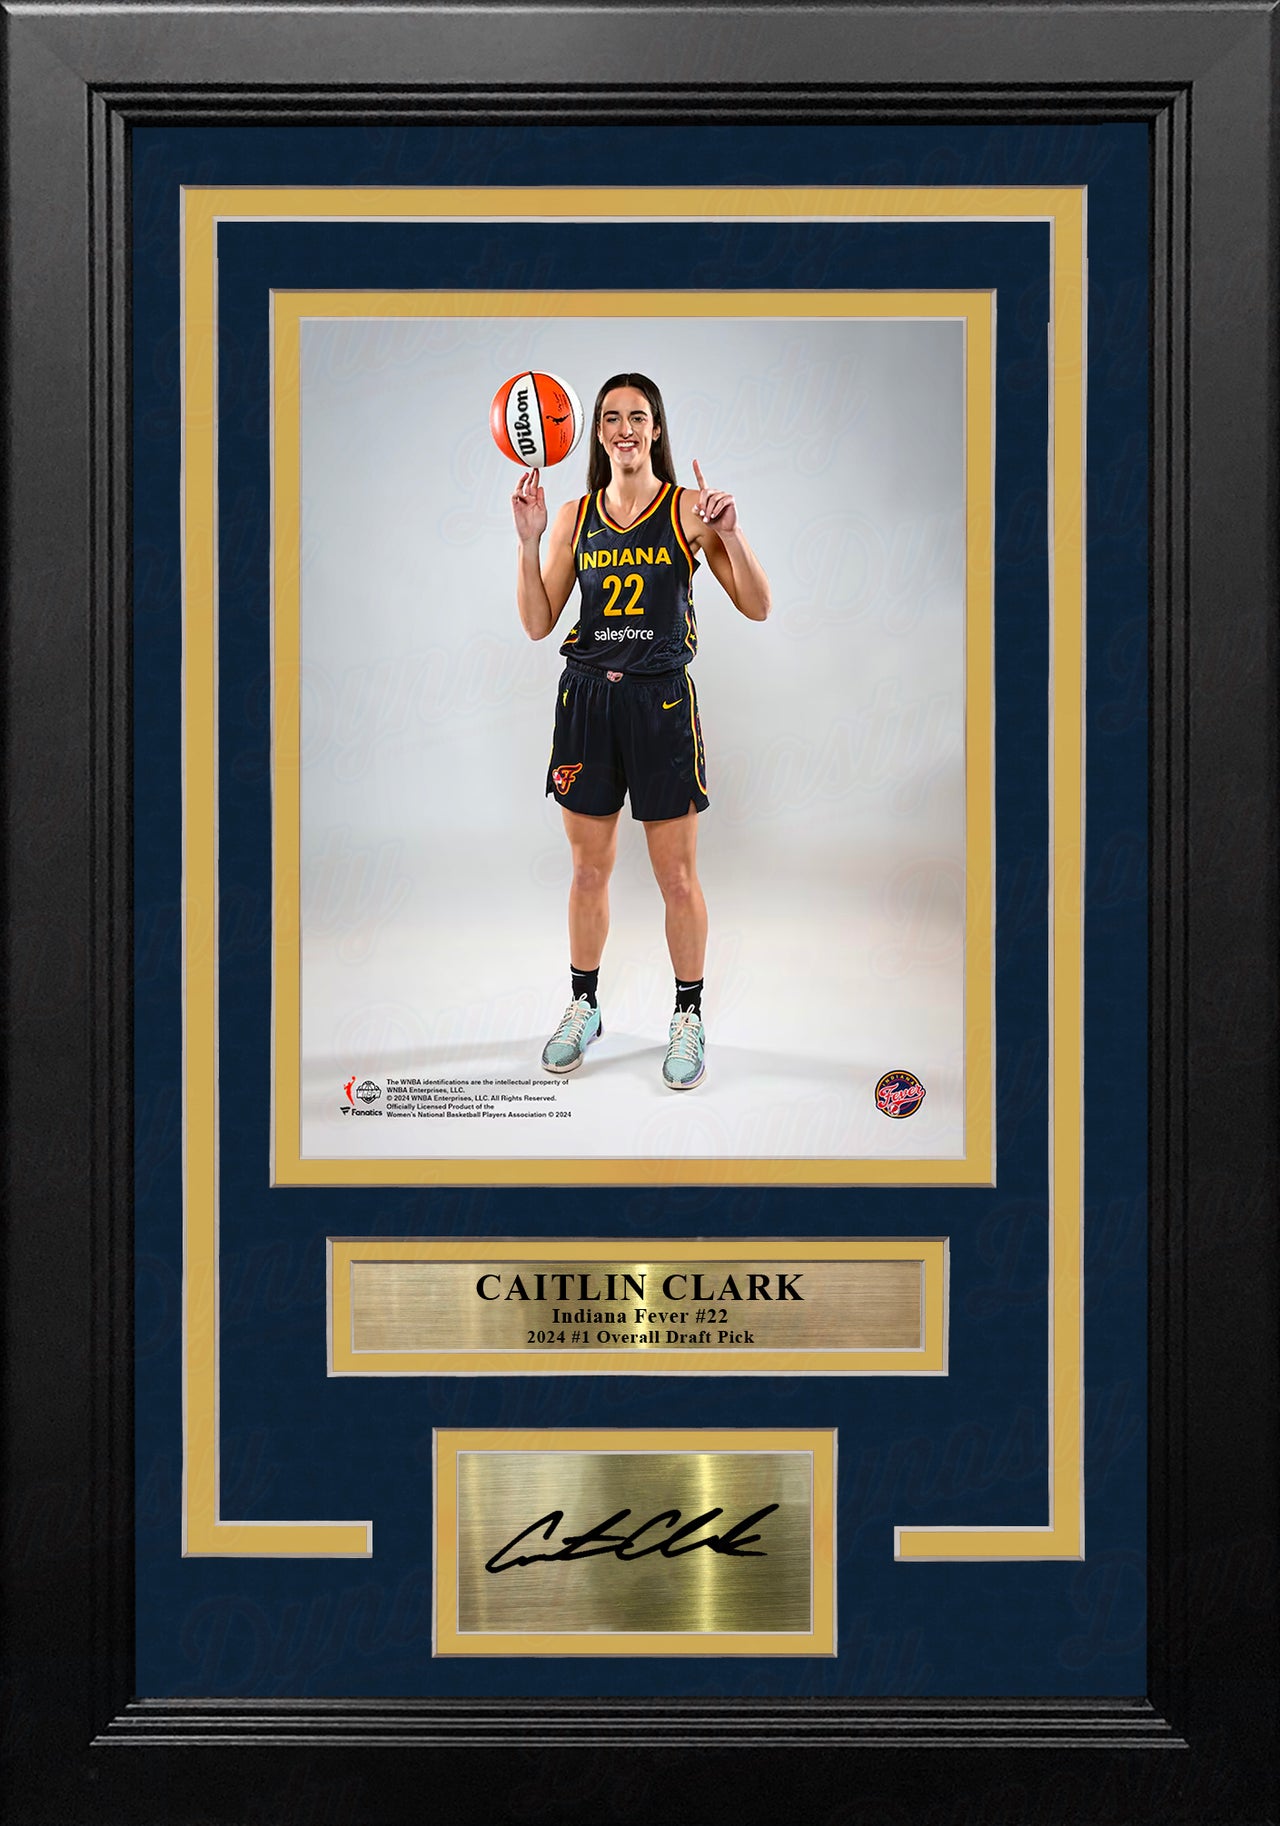 Caitlin Clark Number One Draft Pose Indiana Fever 8x10 Framed WNBA Photo with Engraved Autograph